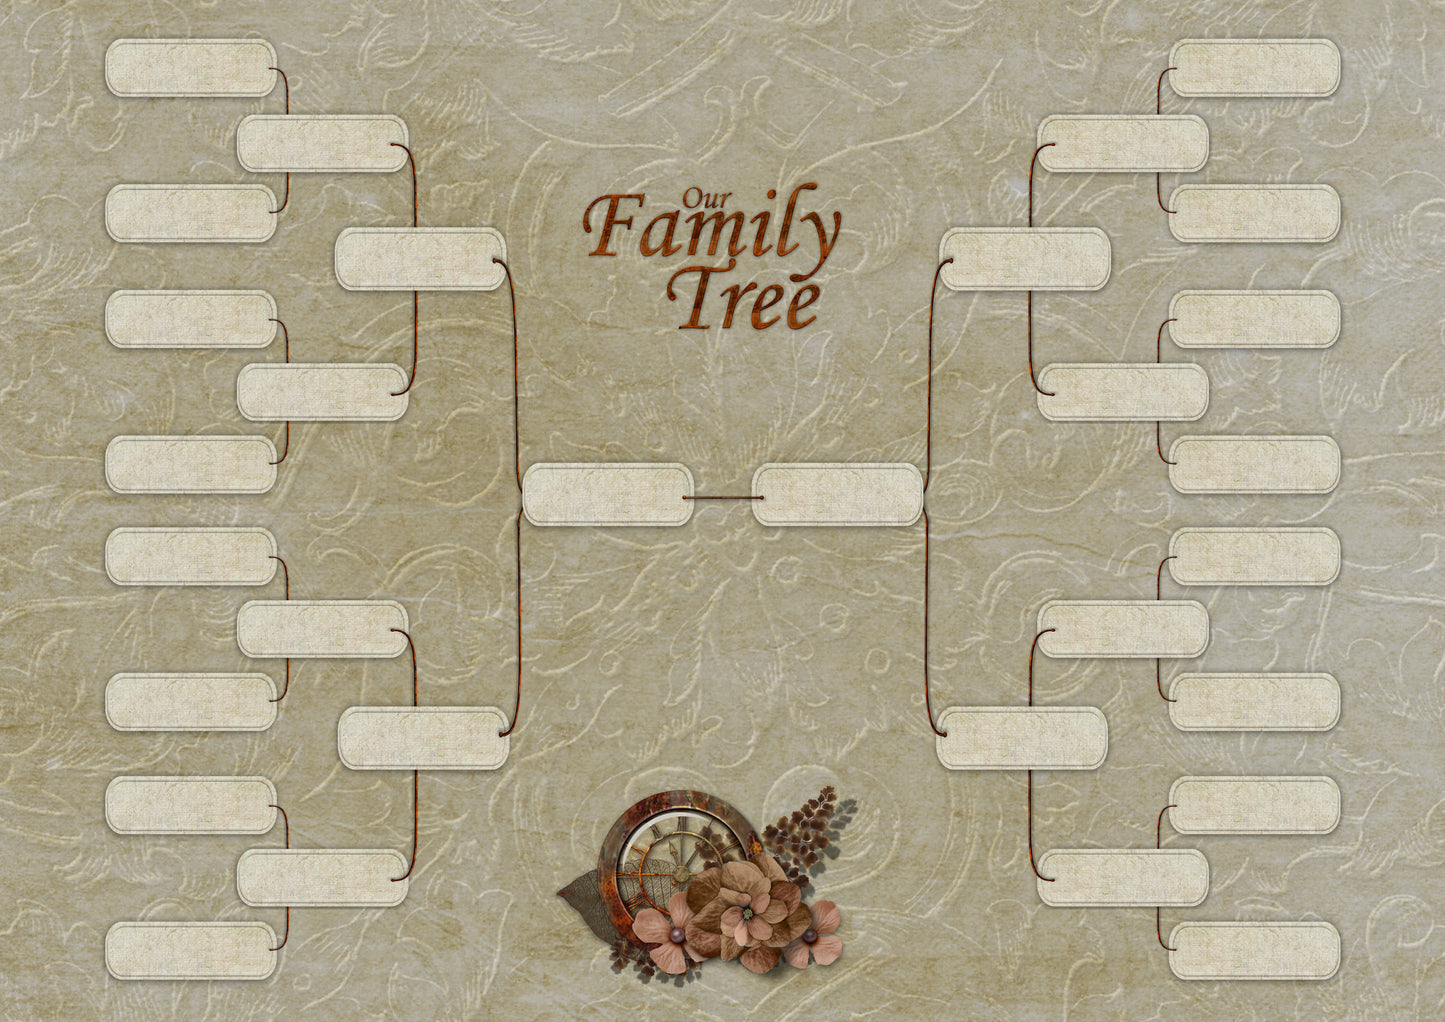 Traditional Family Tree – 4 Generations Paternal & Maternal